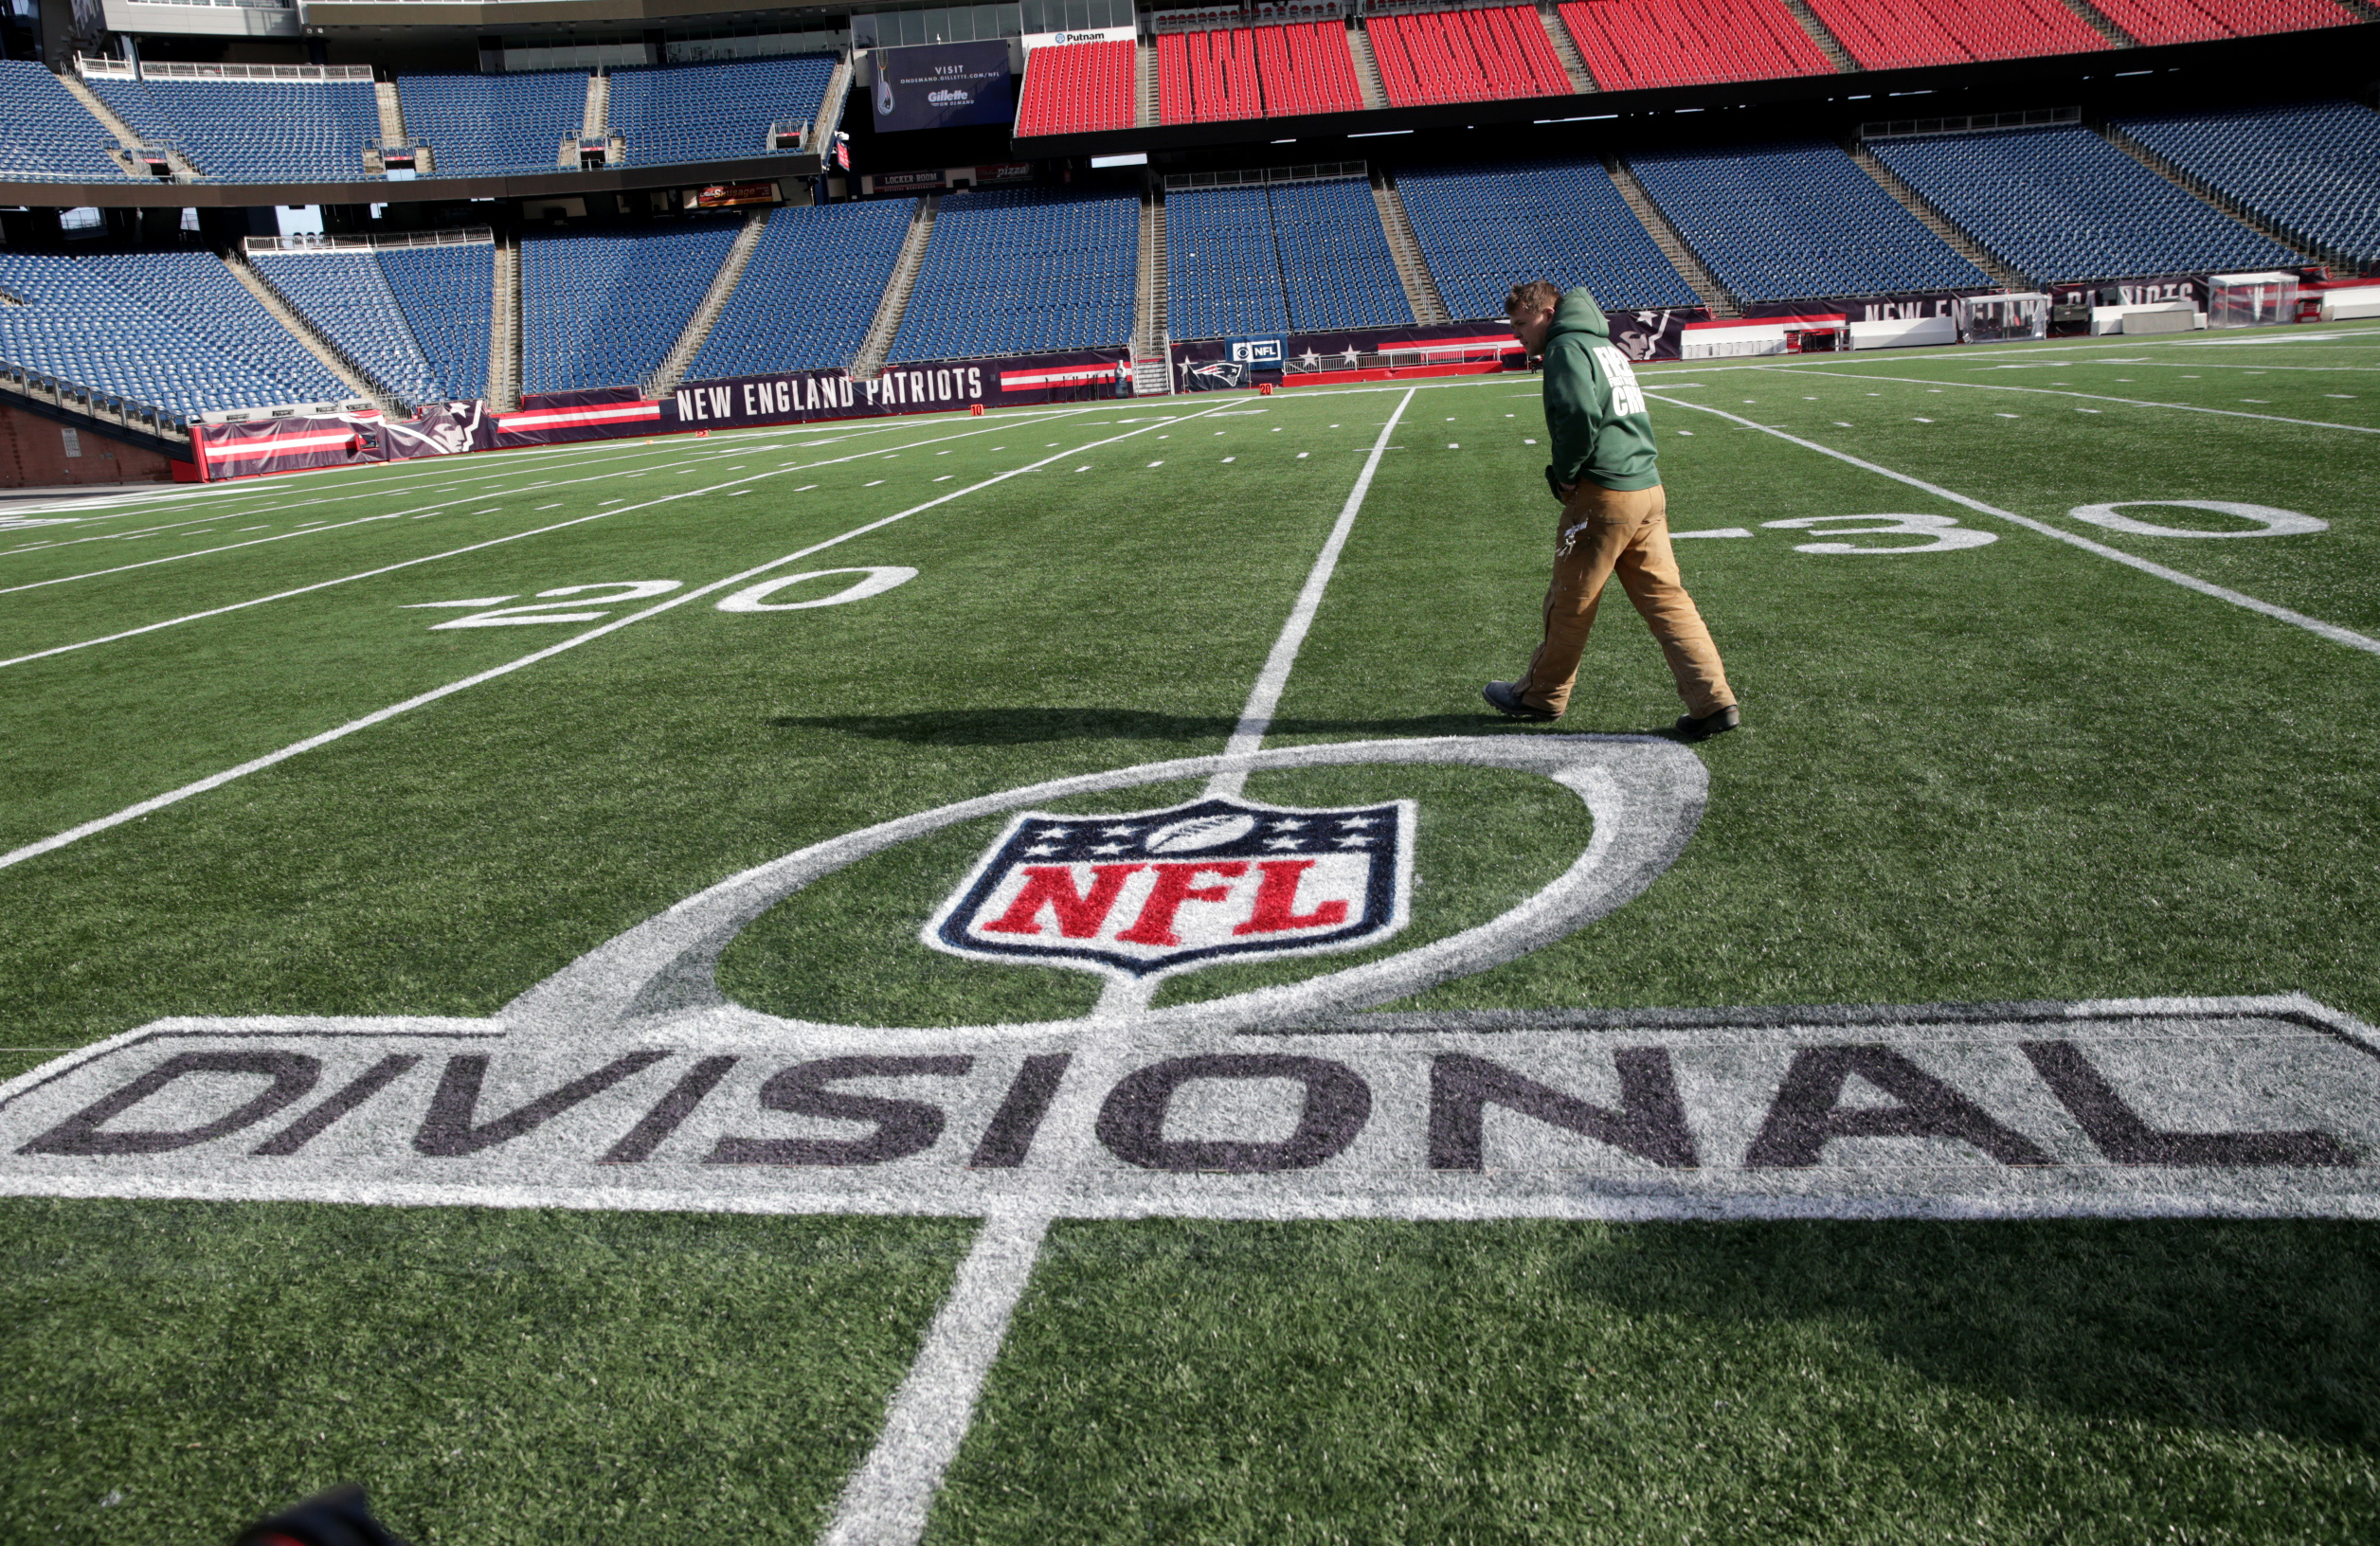 Preparations For AFC Divisional Playoff Game At Gillette Stadium